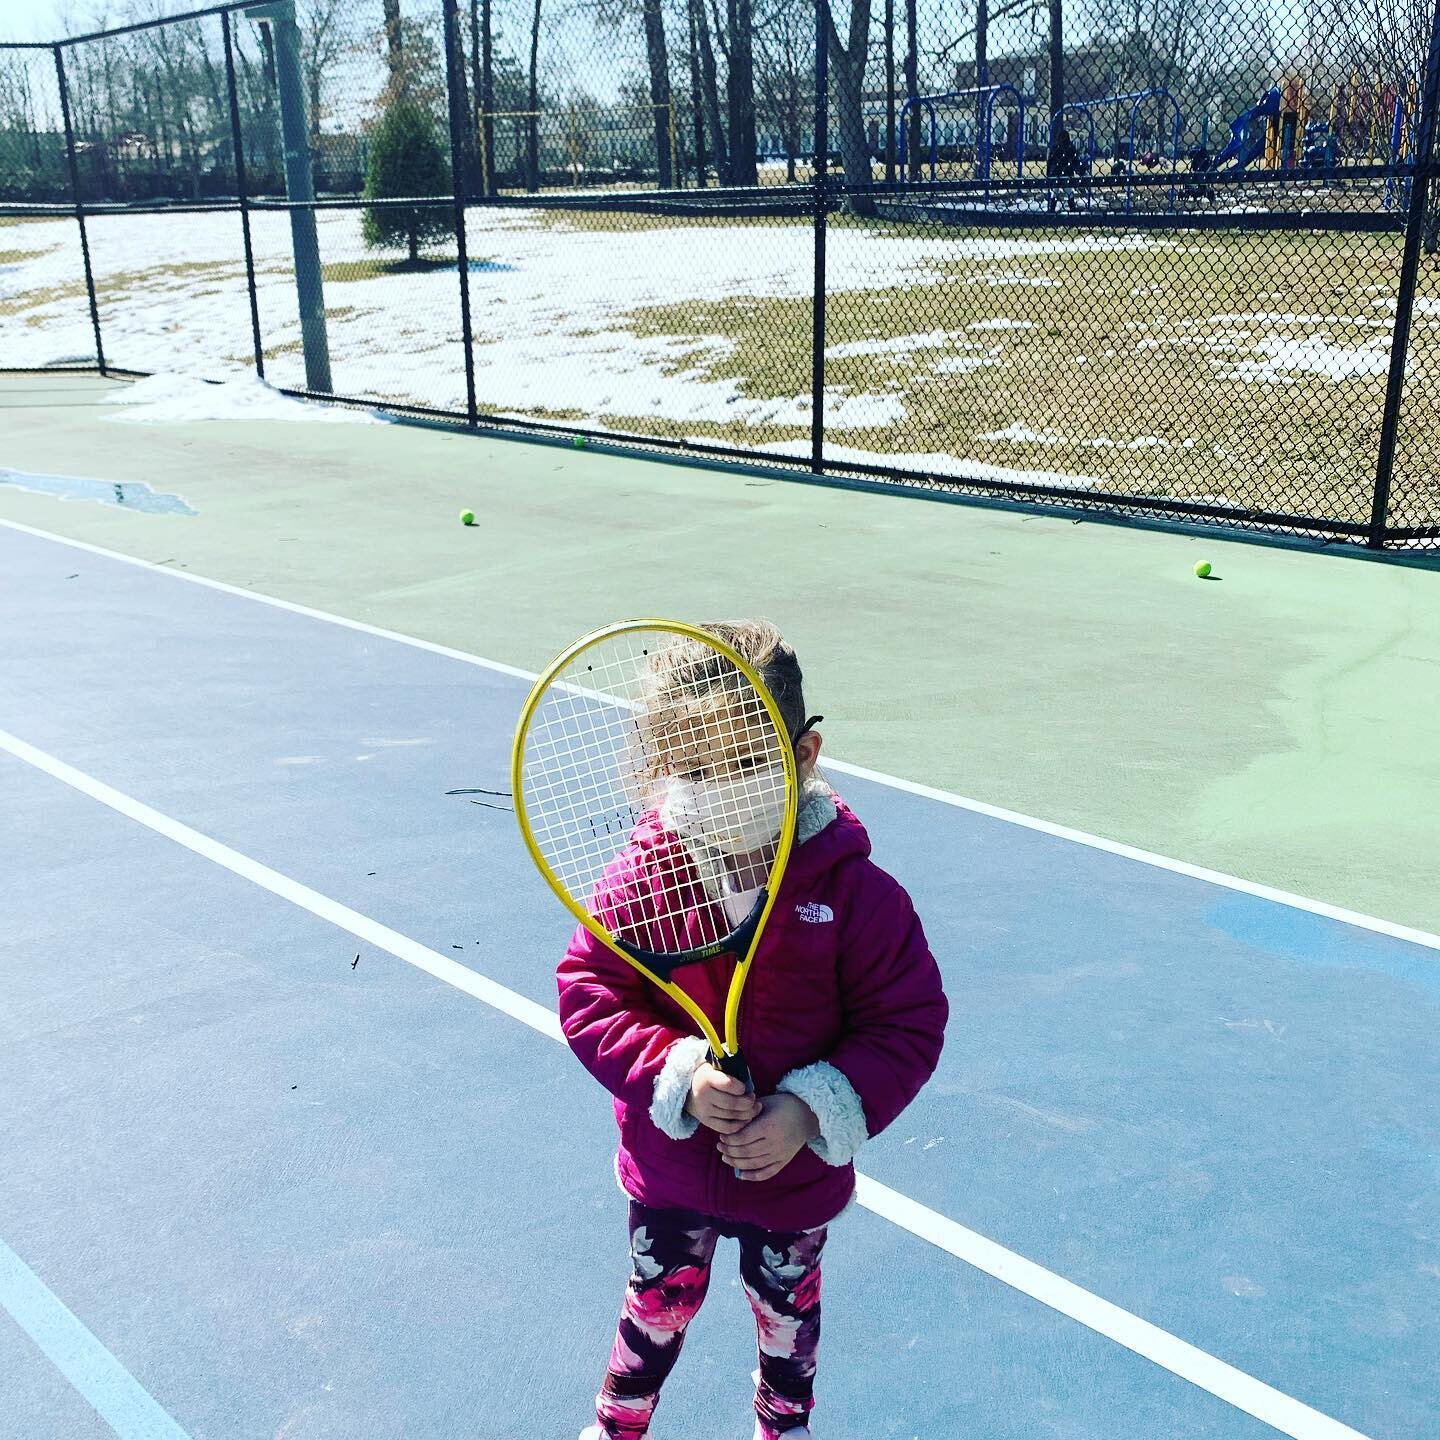 She watched tennis on tv to prepare for her first lesson! #summitmoms #summitnj #summit #activtiesforkids #activtiesforkidsinessex #tennisforkids #tennislessonsforkids